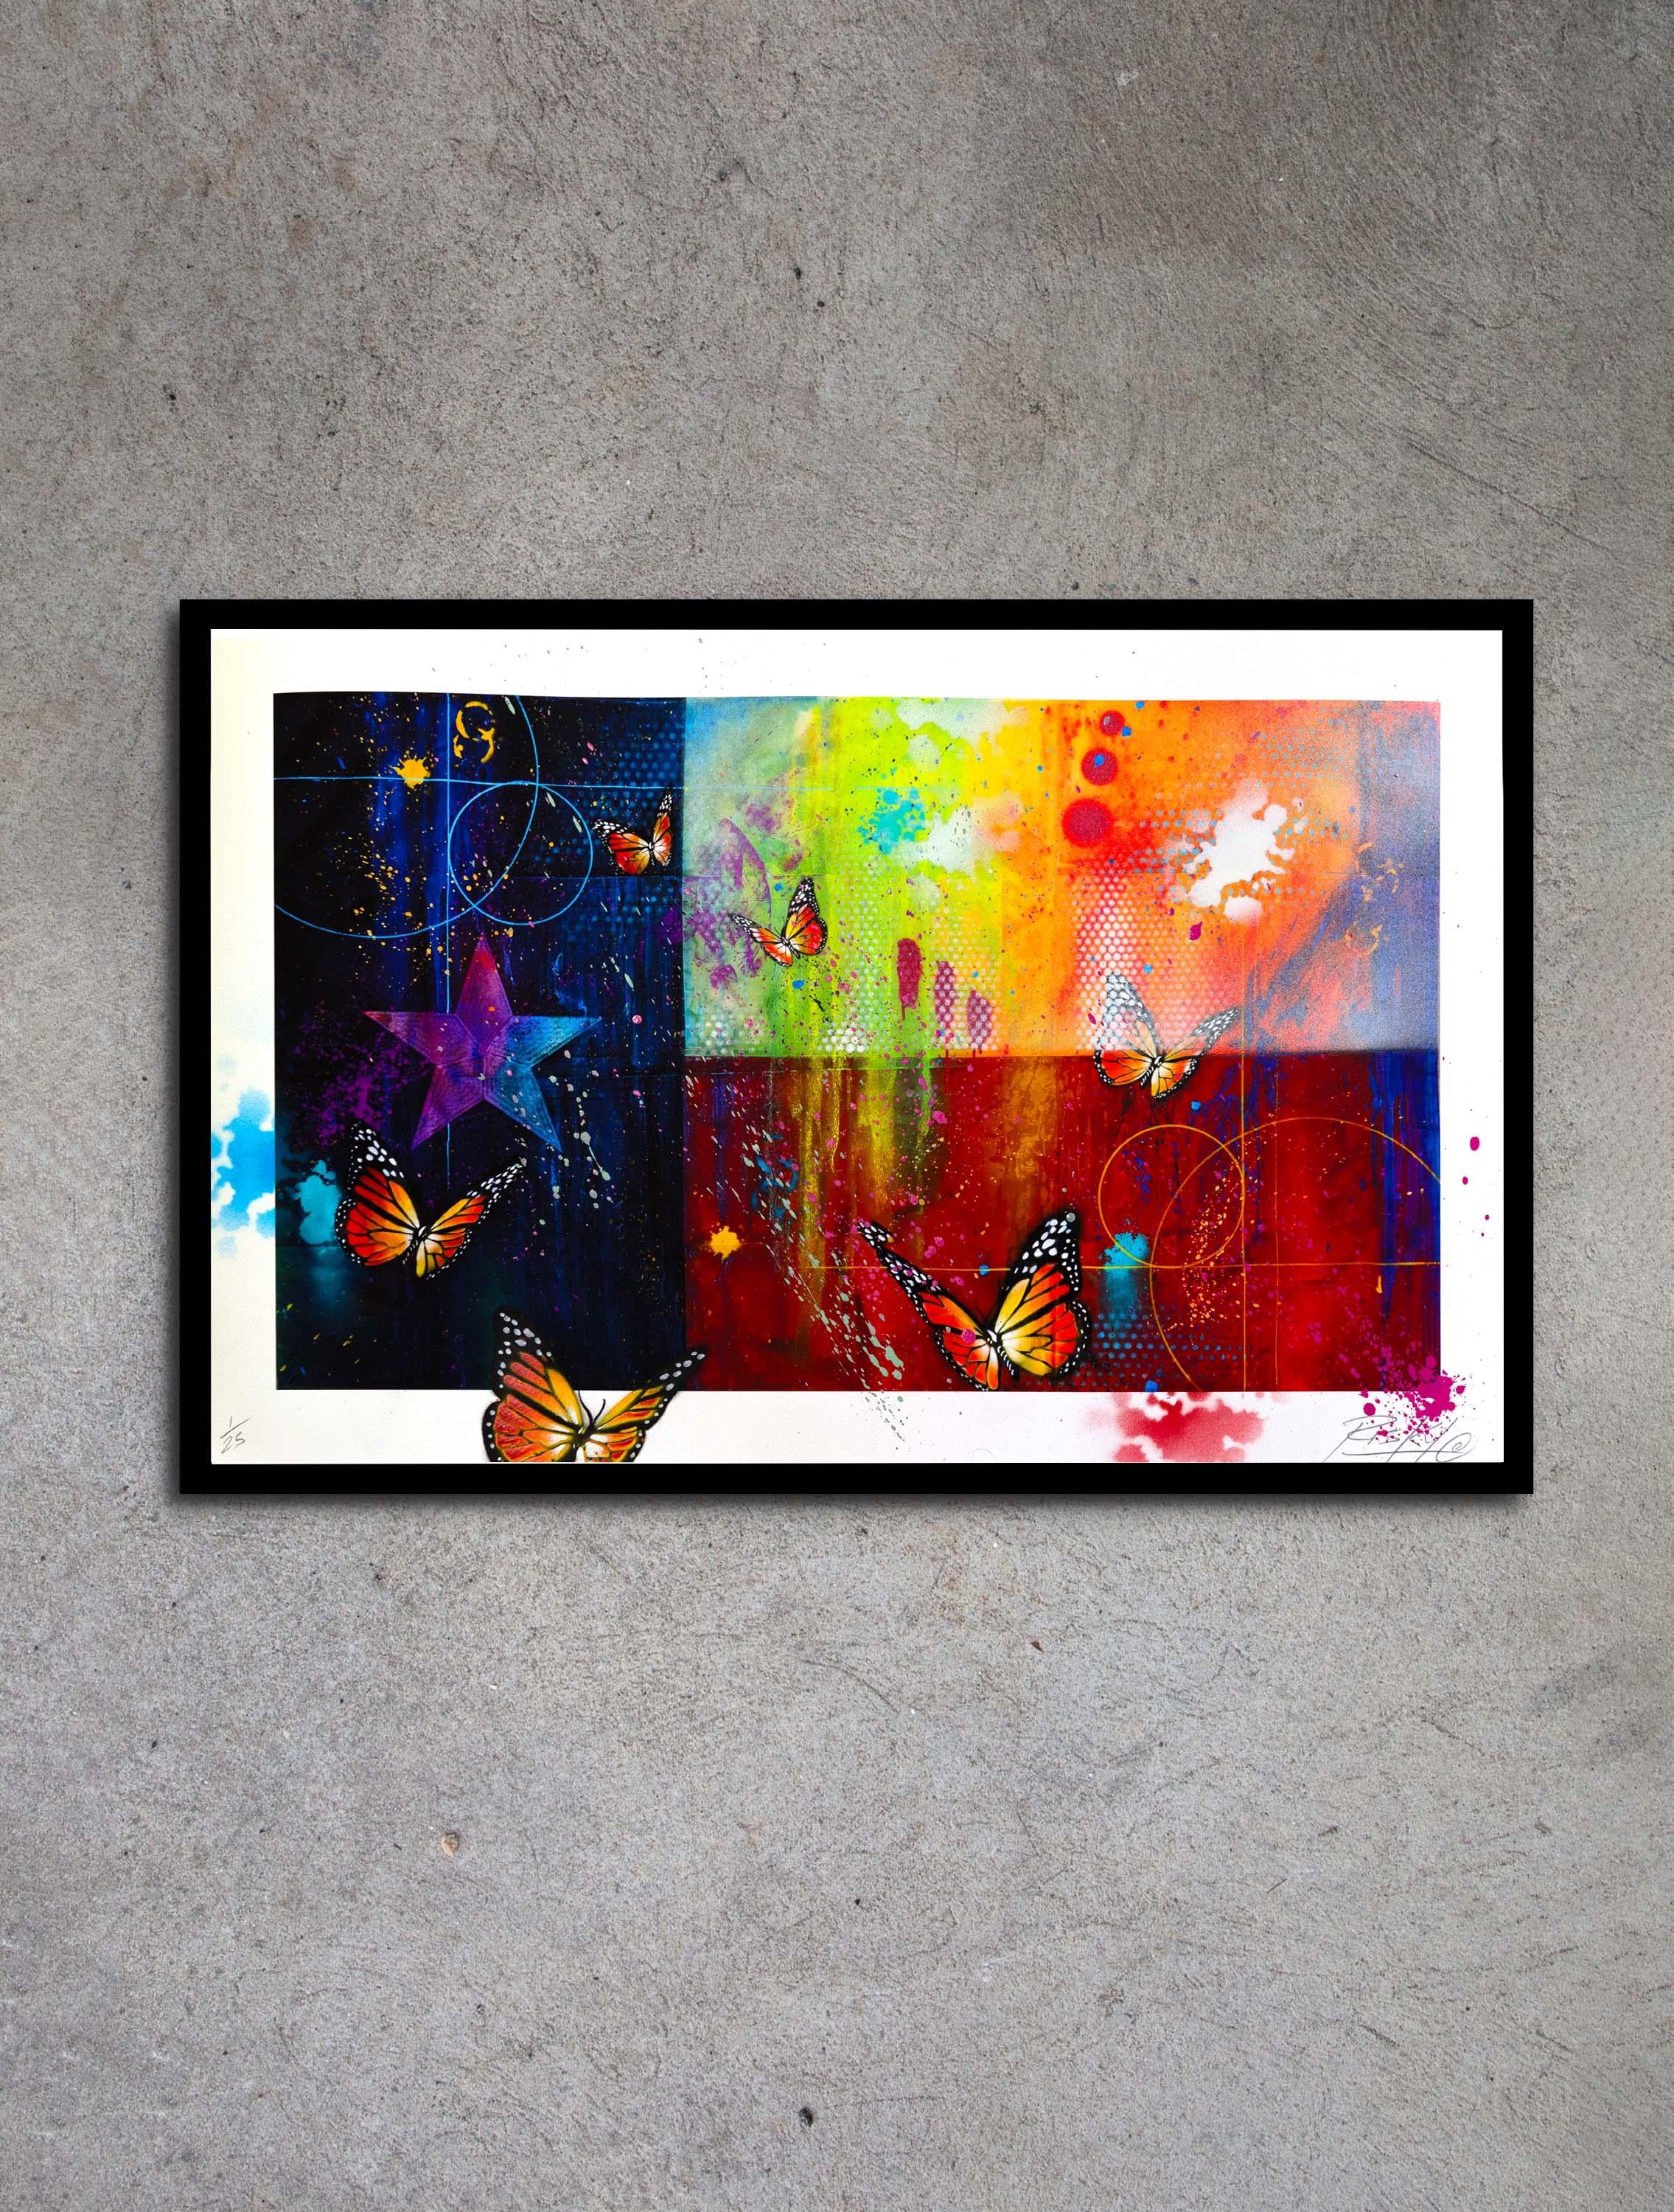 Special edition of 25 prints created by RISK for his exhibition 